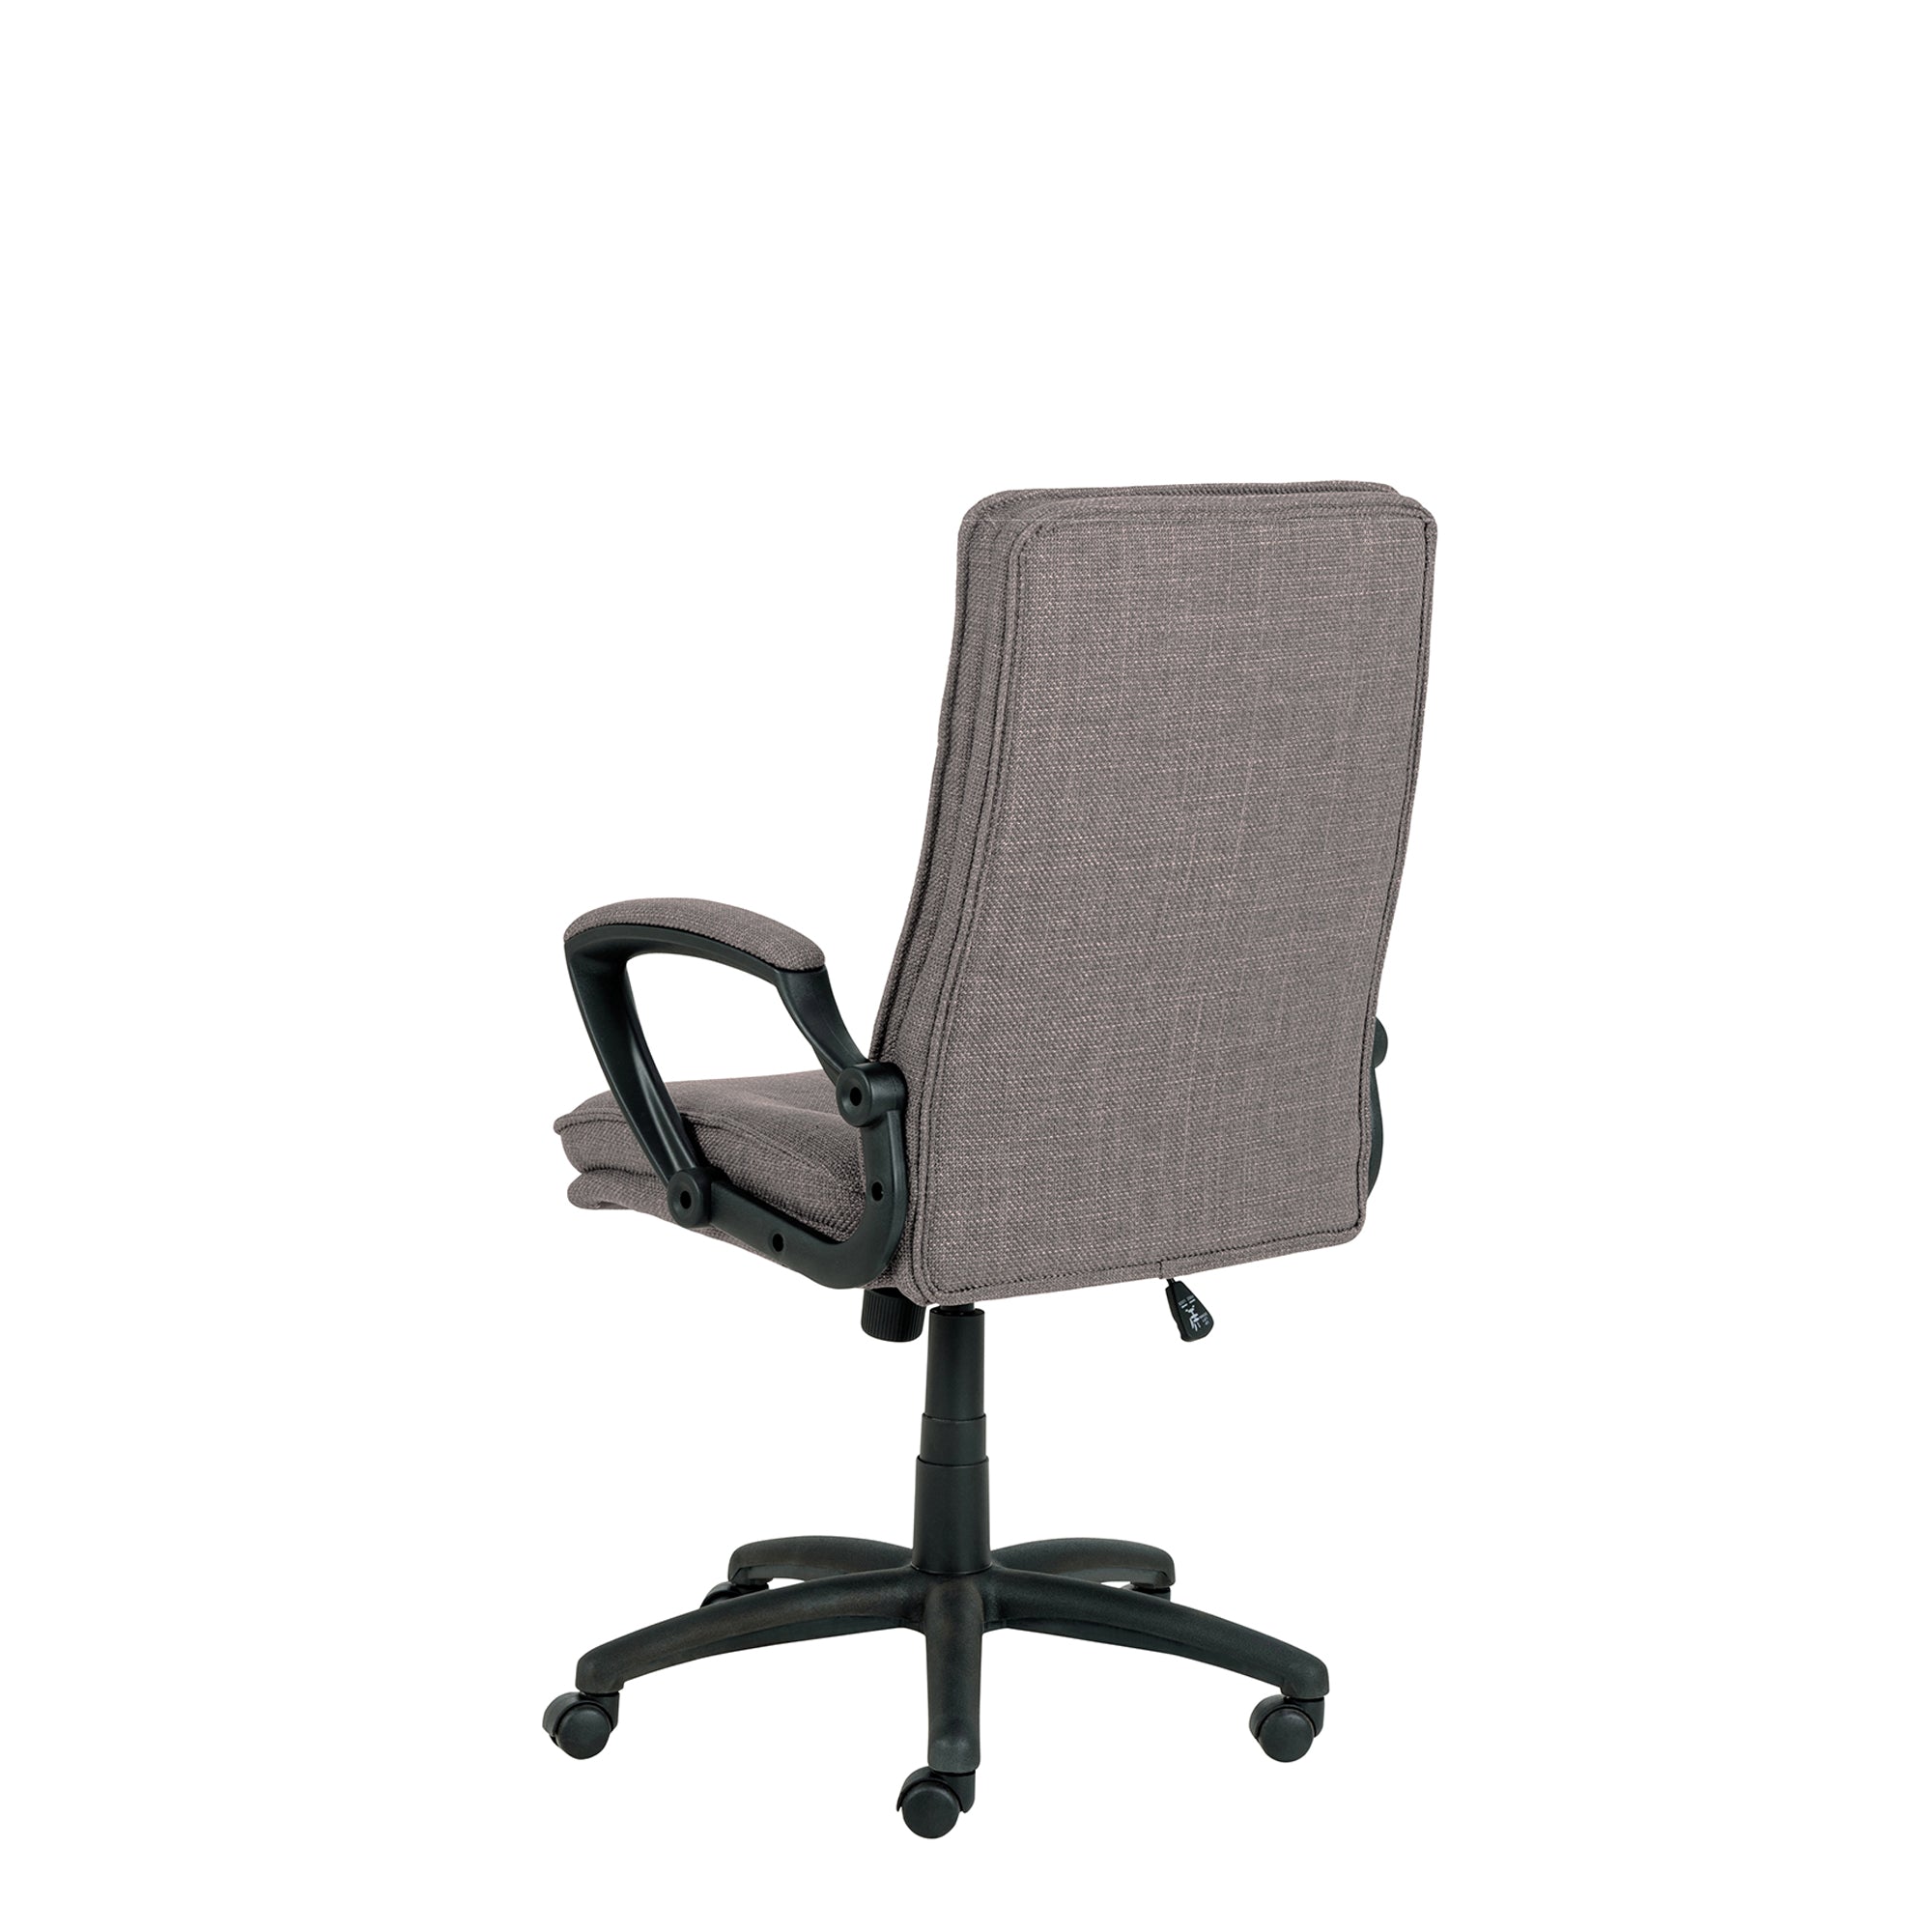 Desk Chair In Basel Light Grey/Brown Fabric (Assembly Required)